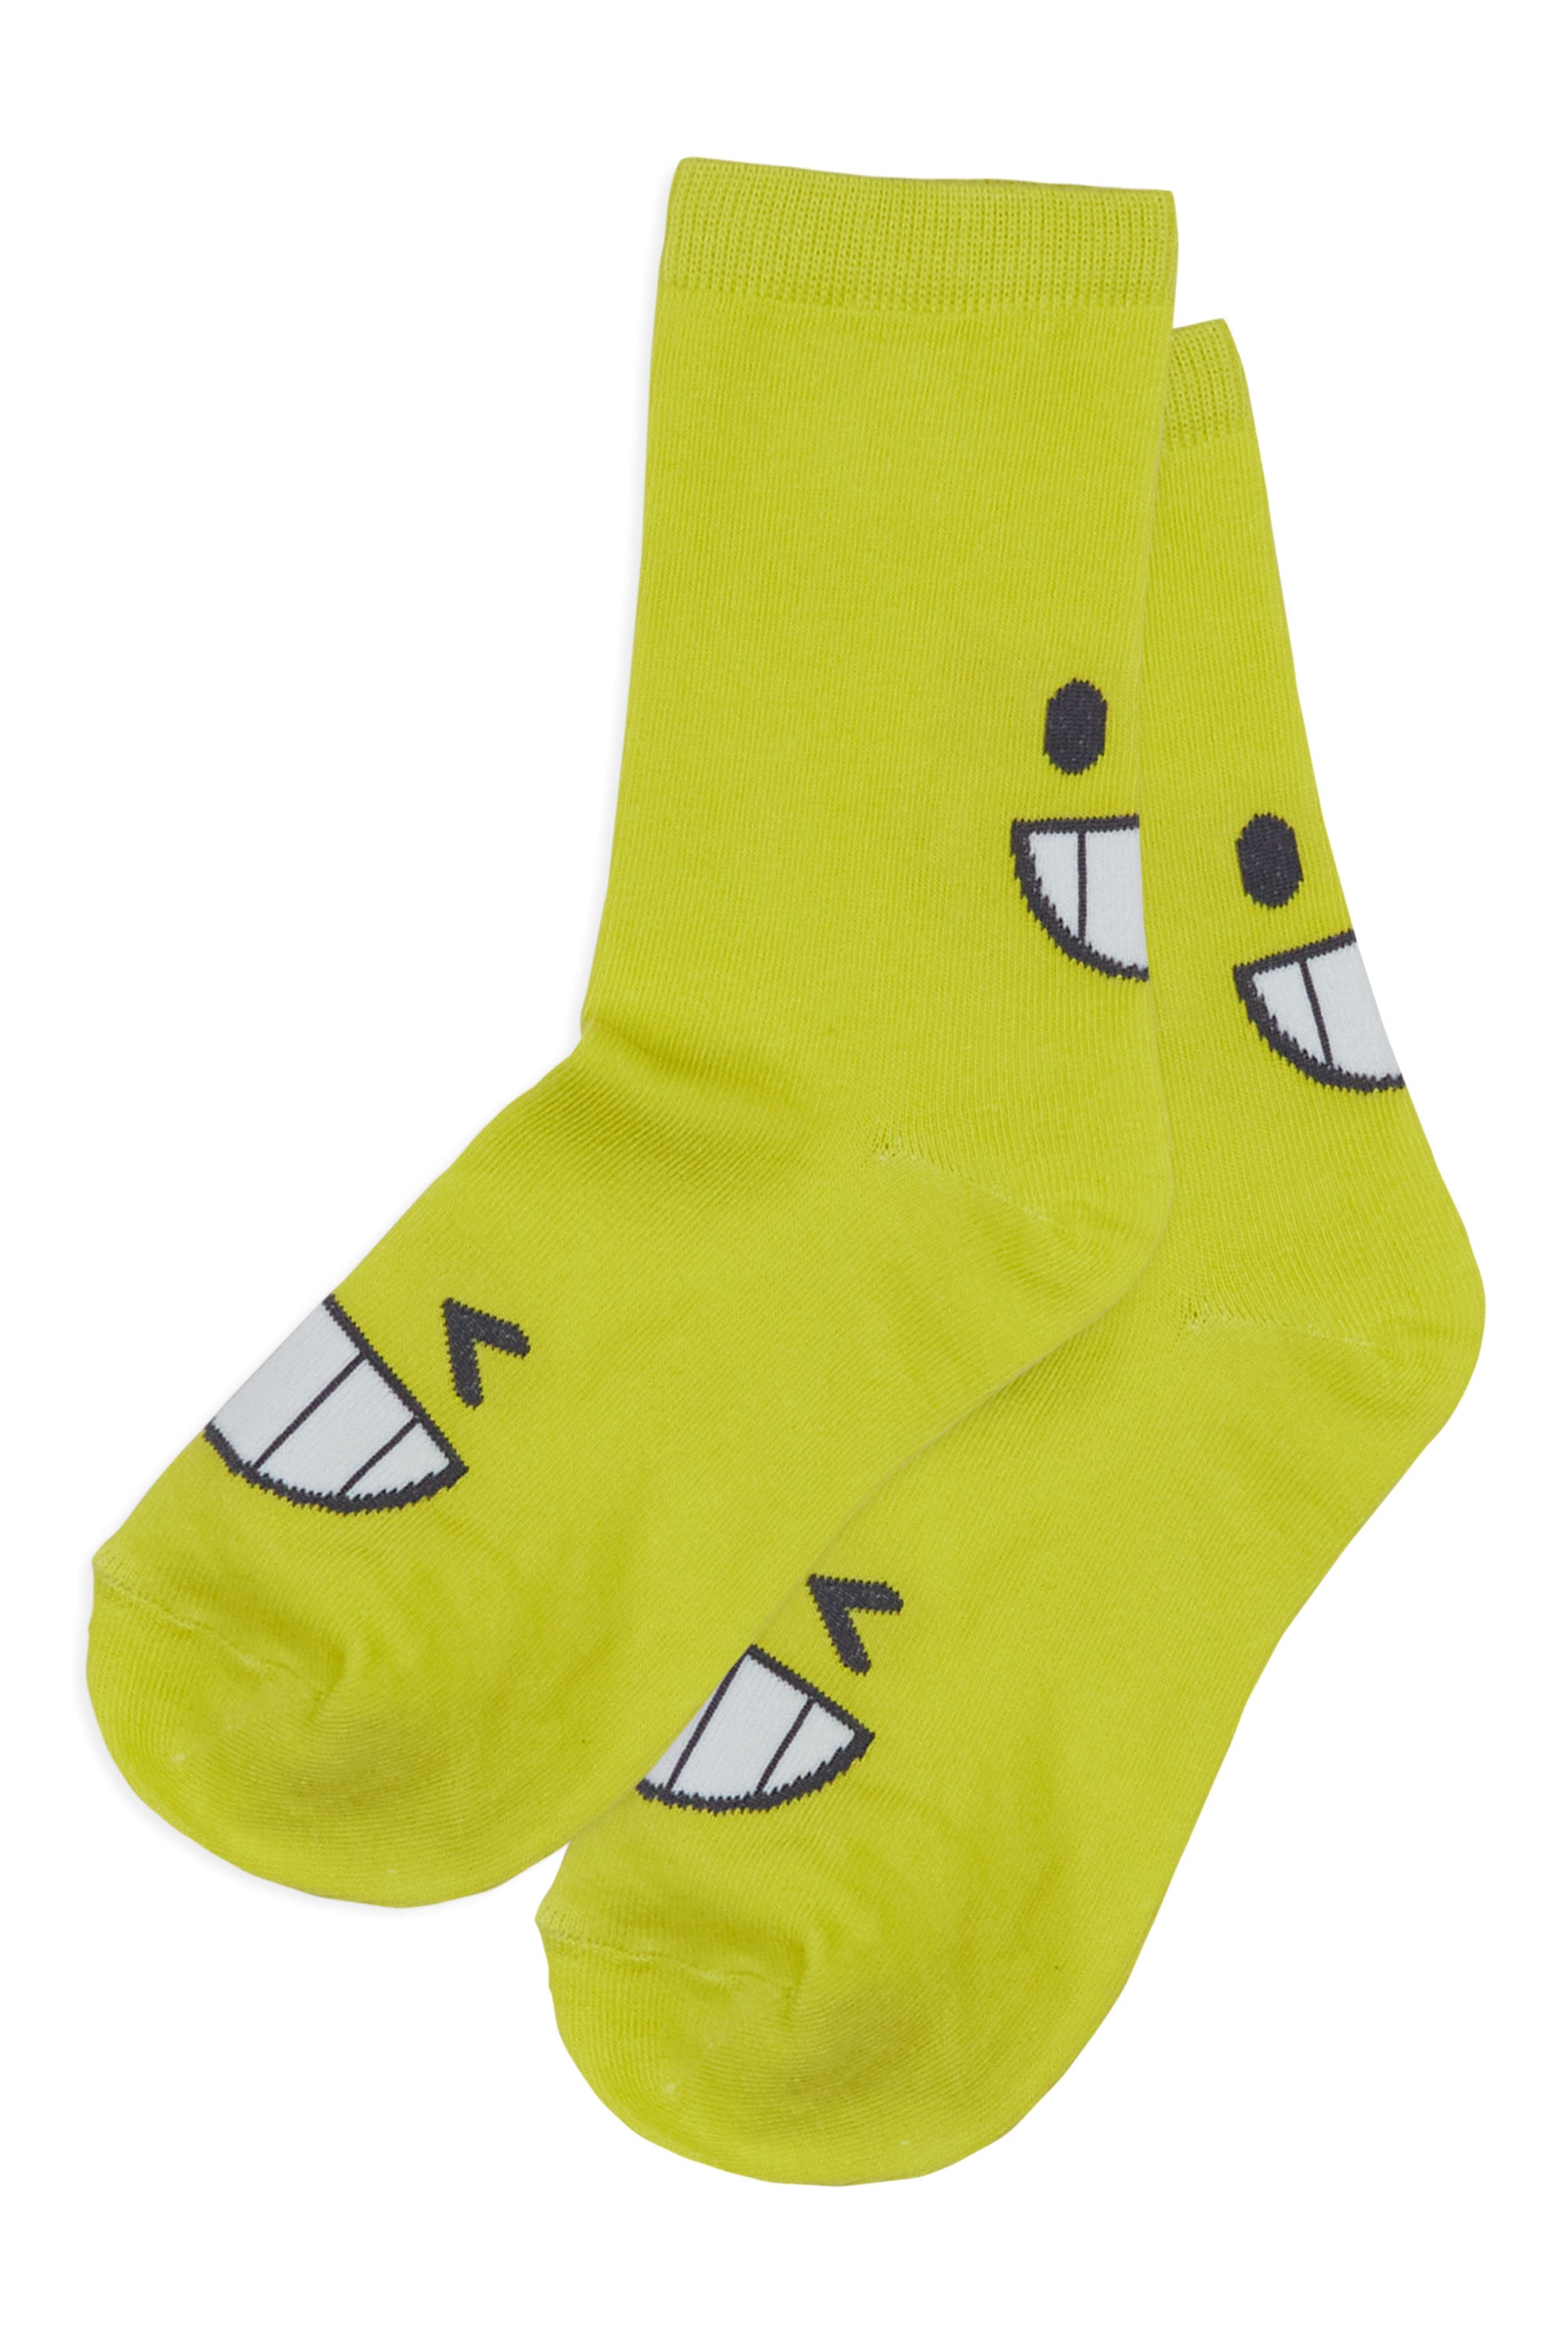 Boys Silly Faces Lime/Pink Socks (2 pack)